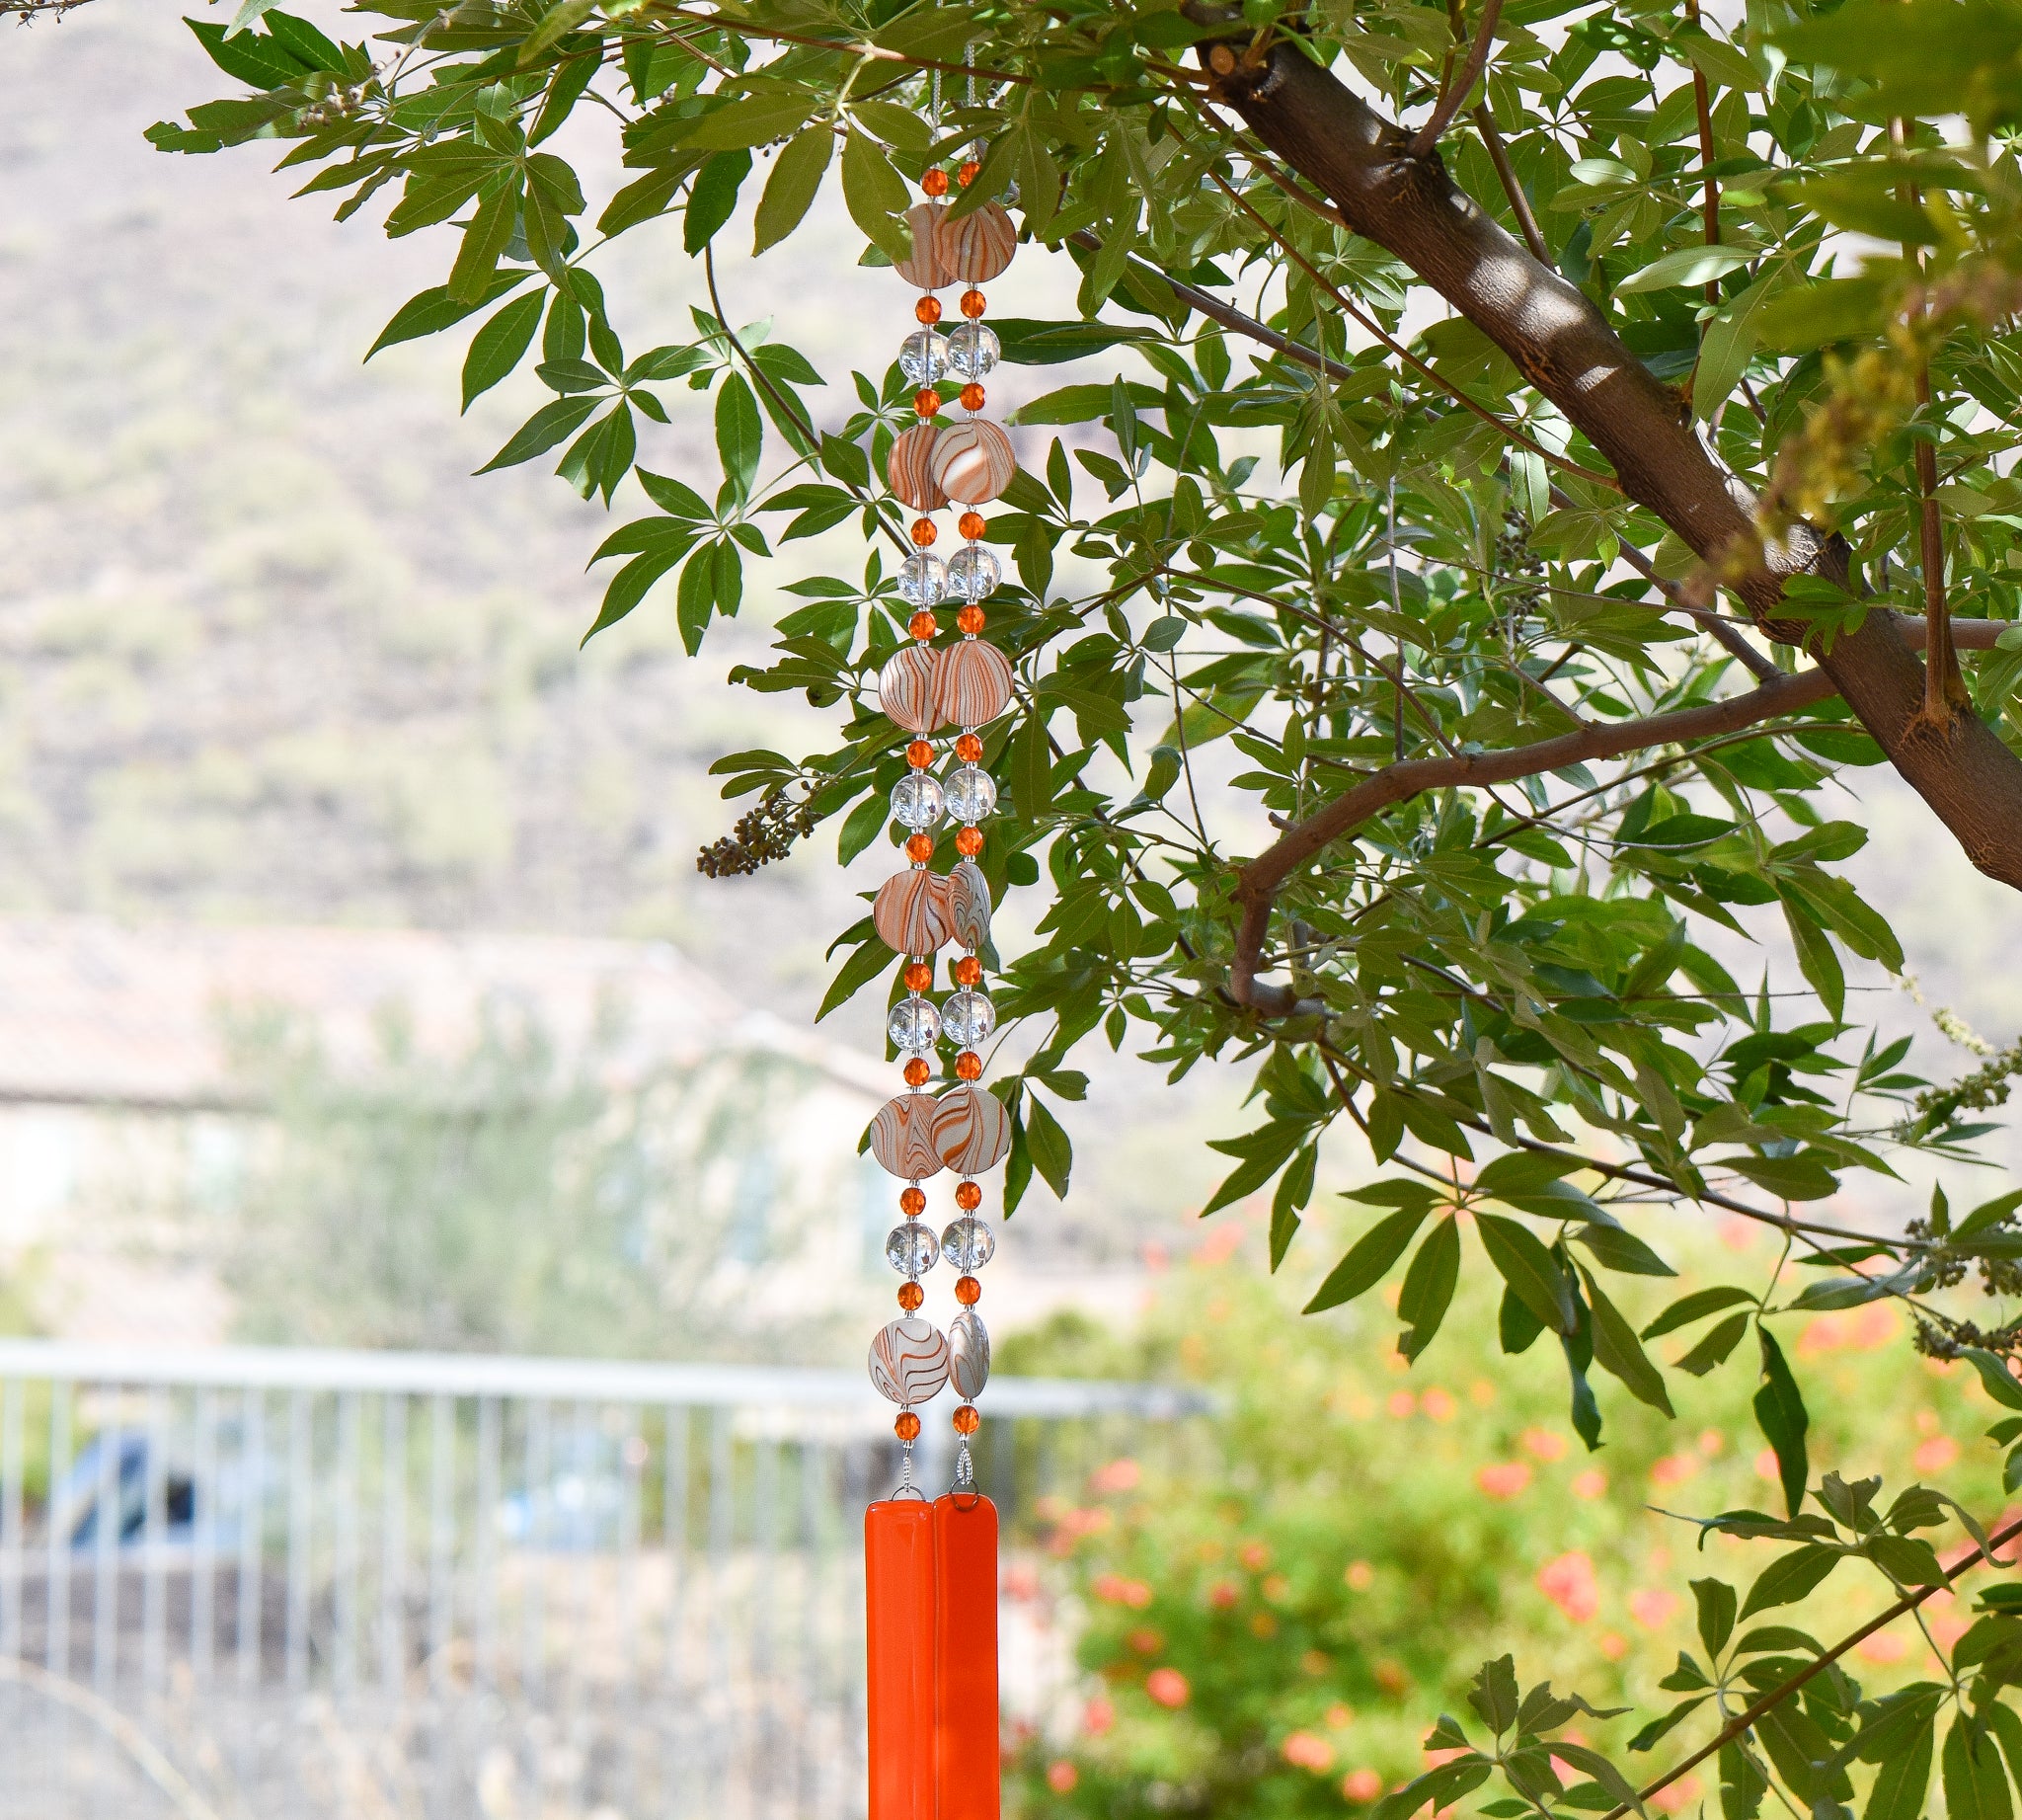 bright orange striped acrylic beads paired with smaller orange beads and  large clear glass beads, strung on wire and hanging vertically, anchored by orange fused glass pieces. hanging from tree